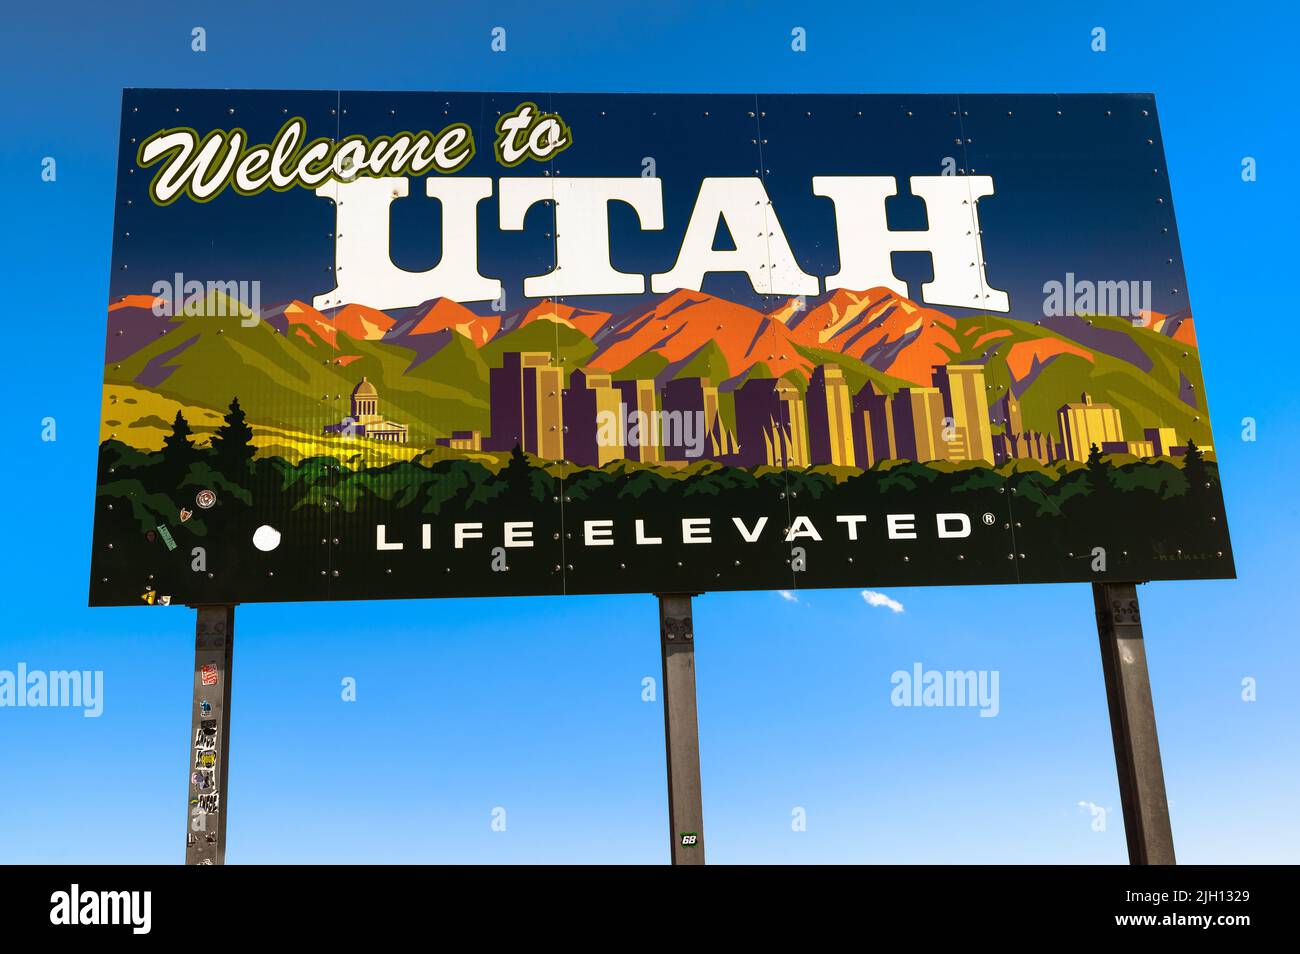 Welcome to Utah State Sign along US-163 near Monument Valley Stock Photo